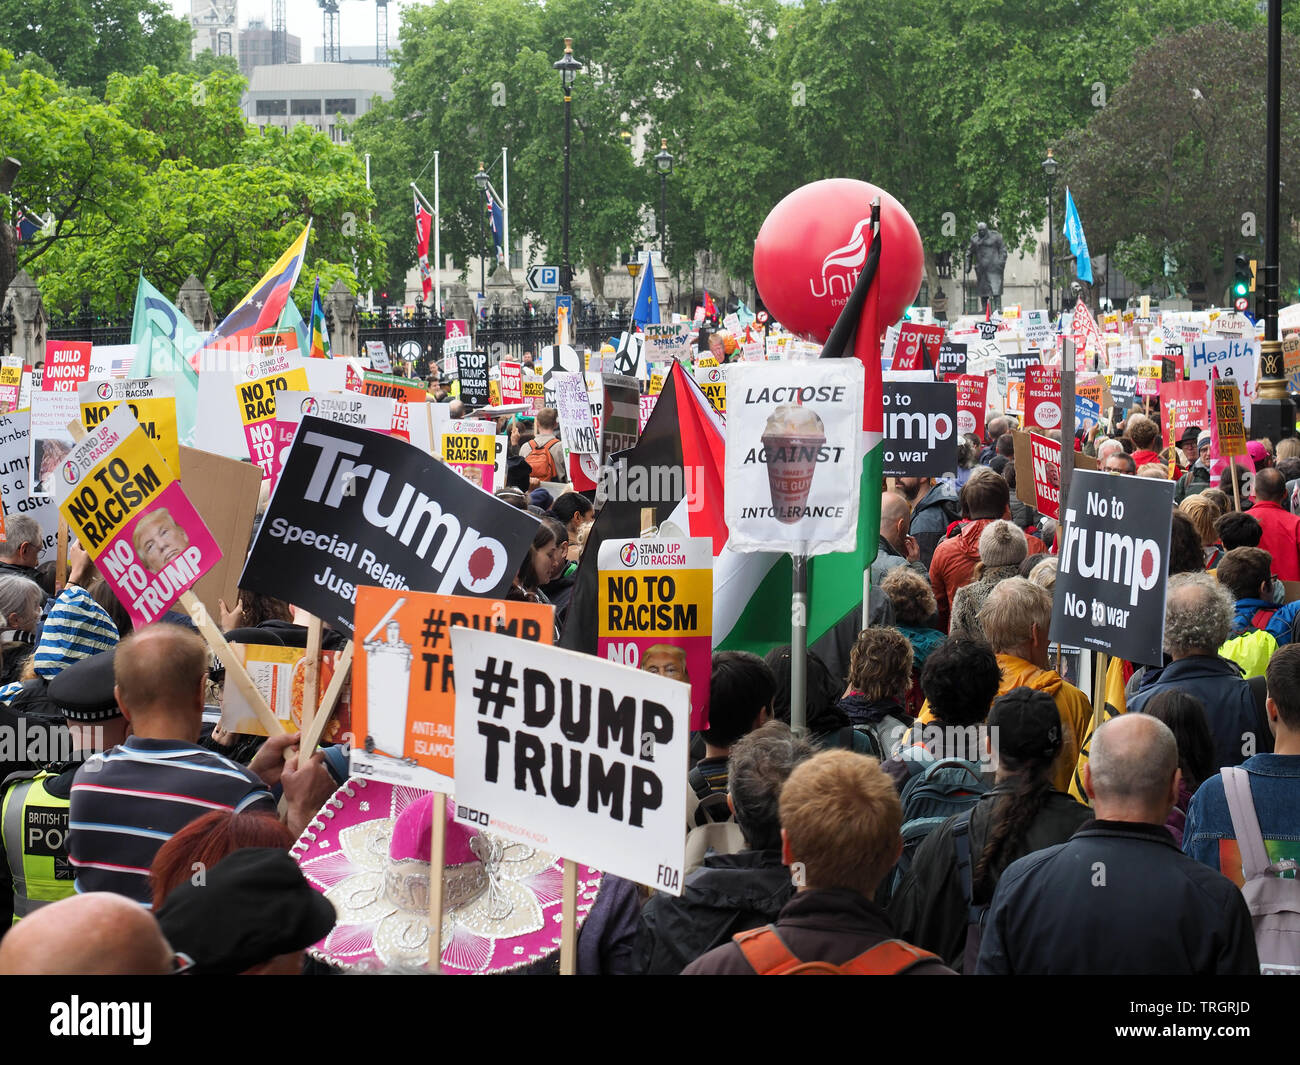 Crowds of people protesting in Parliament Square against the visit of President Donald Trump to London in June 2019 Stock Photo